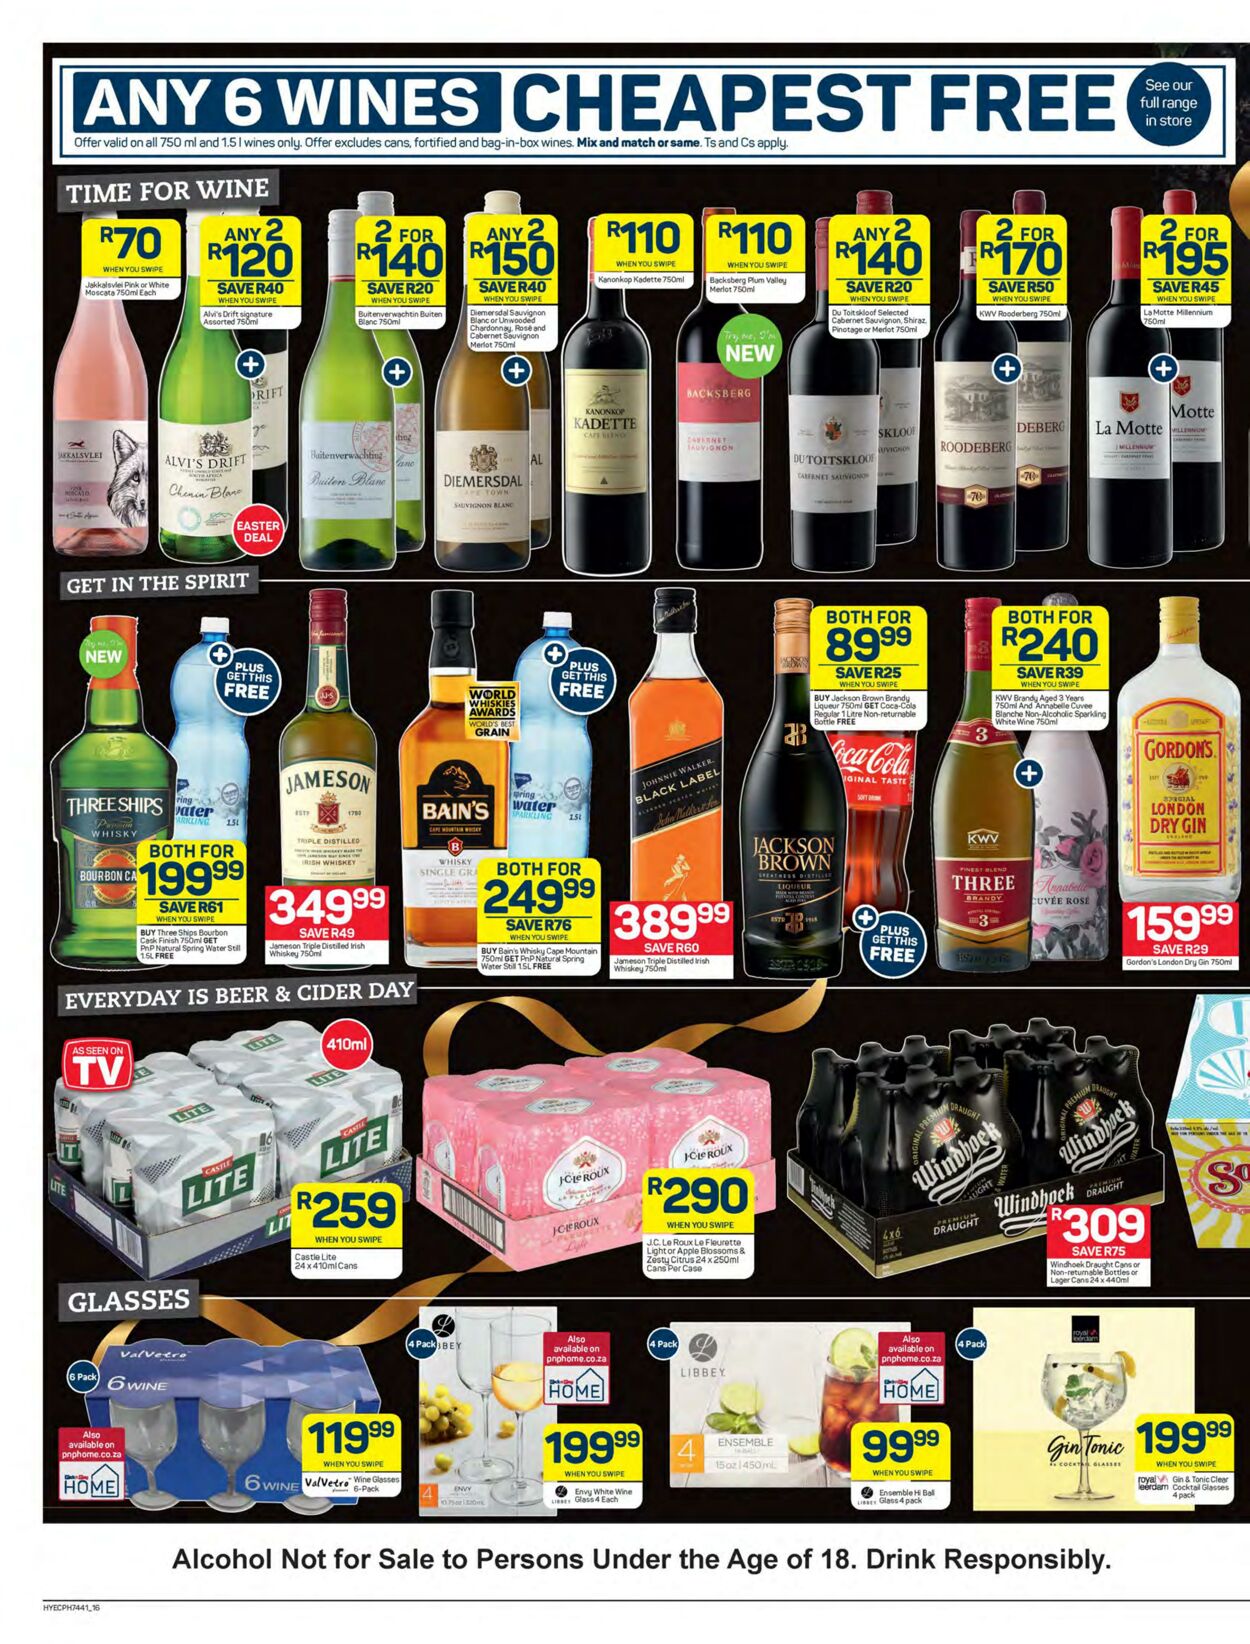 Pick n Pay Promotional Leaflet - Easter - Valid from 27.03 to 02.04 ...